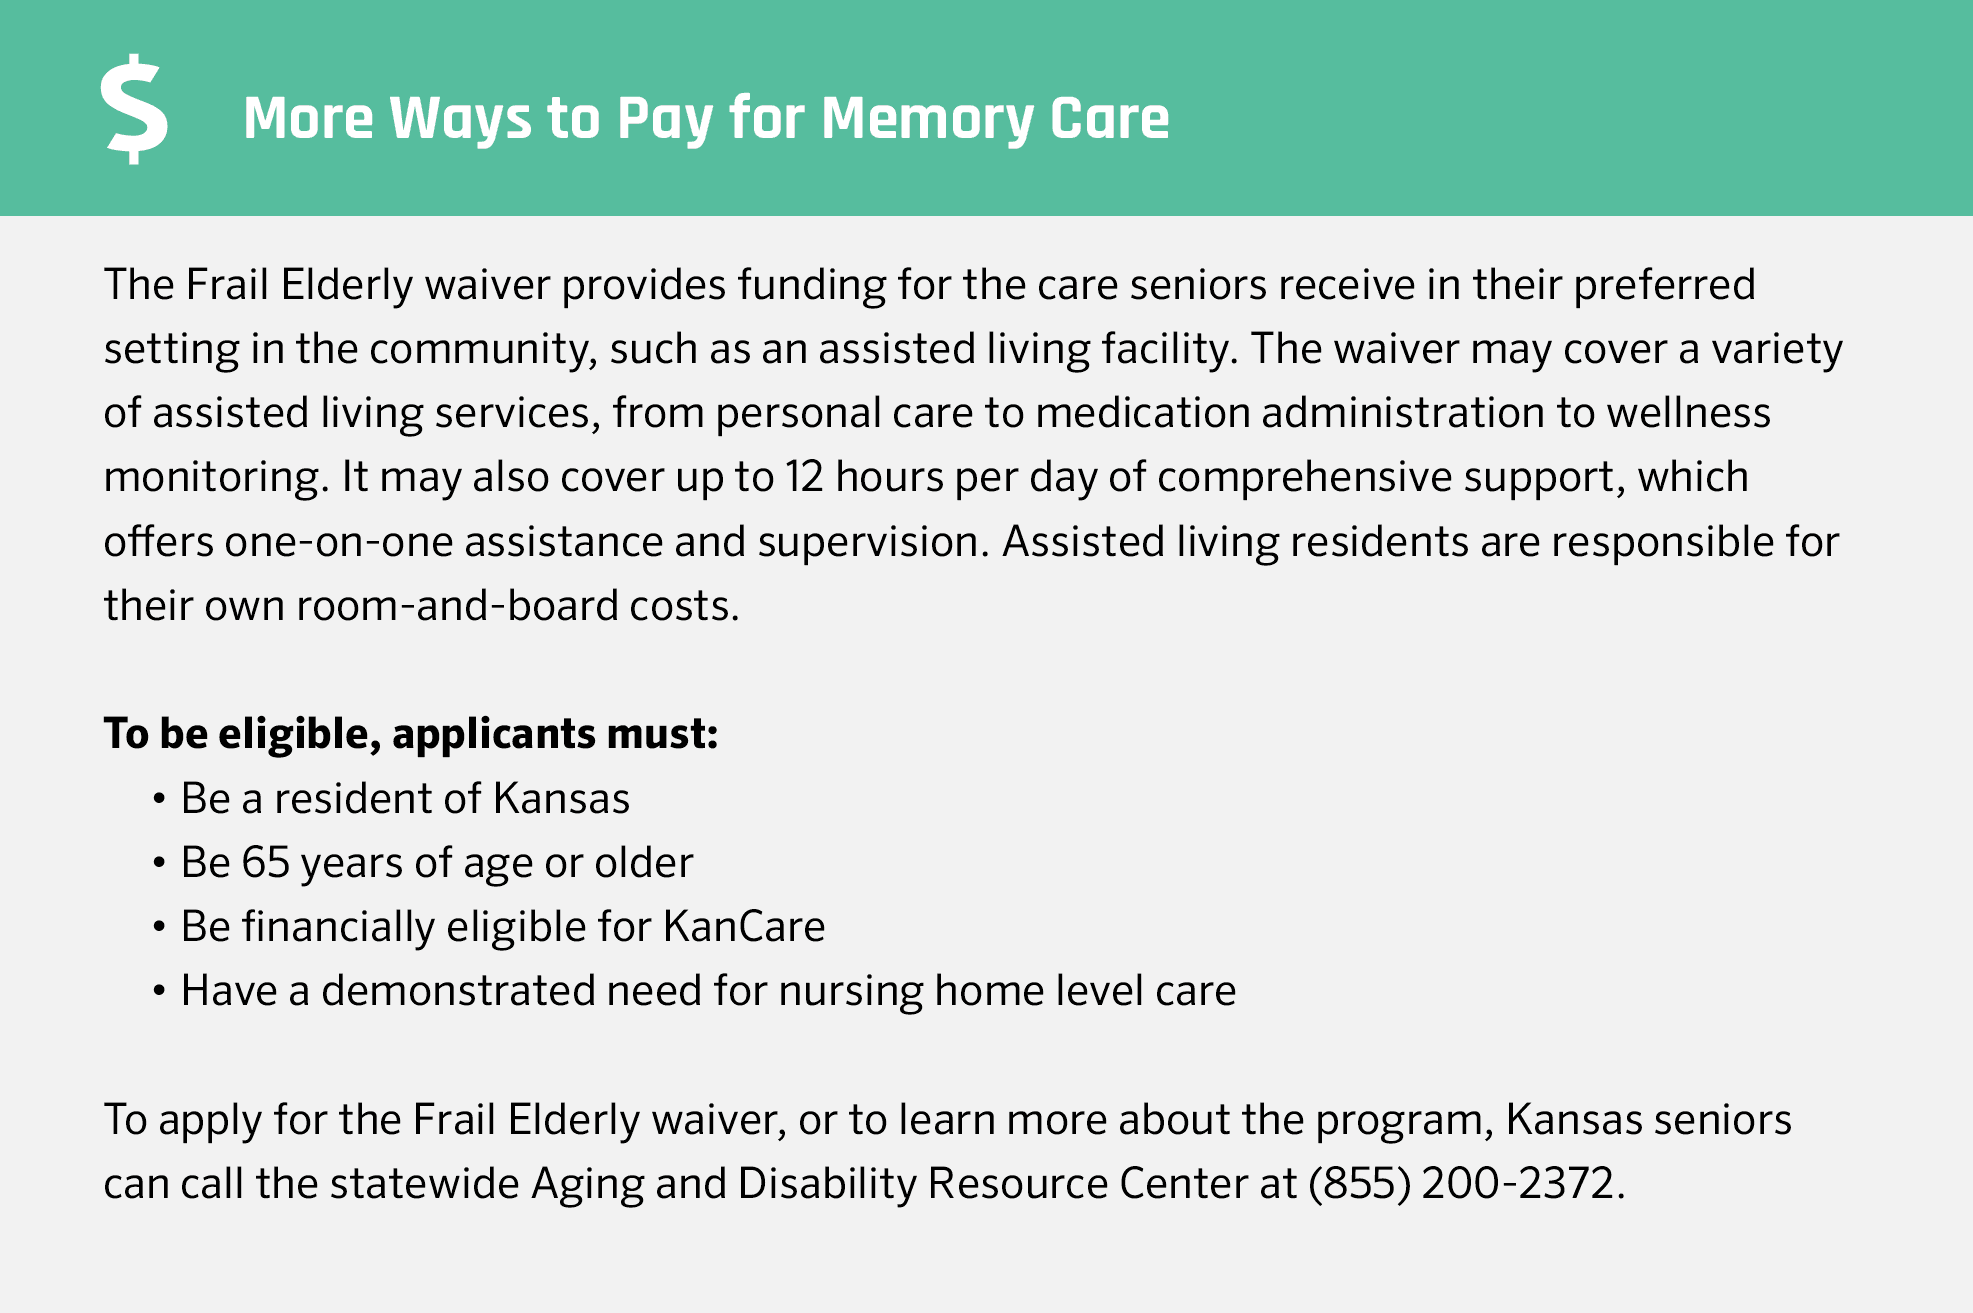 More ways o pay for memory care in Kansas